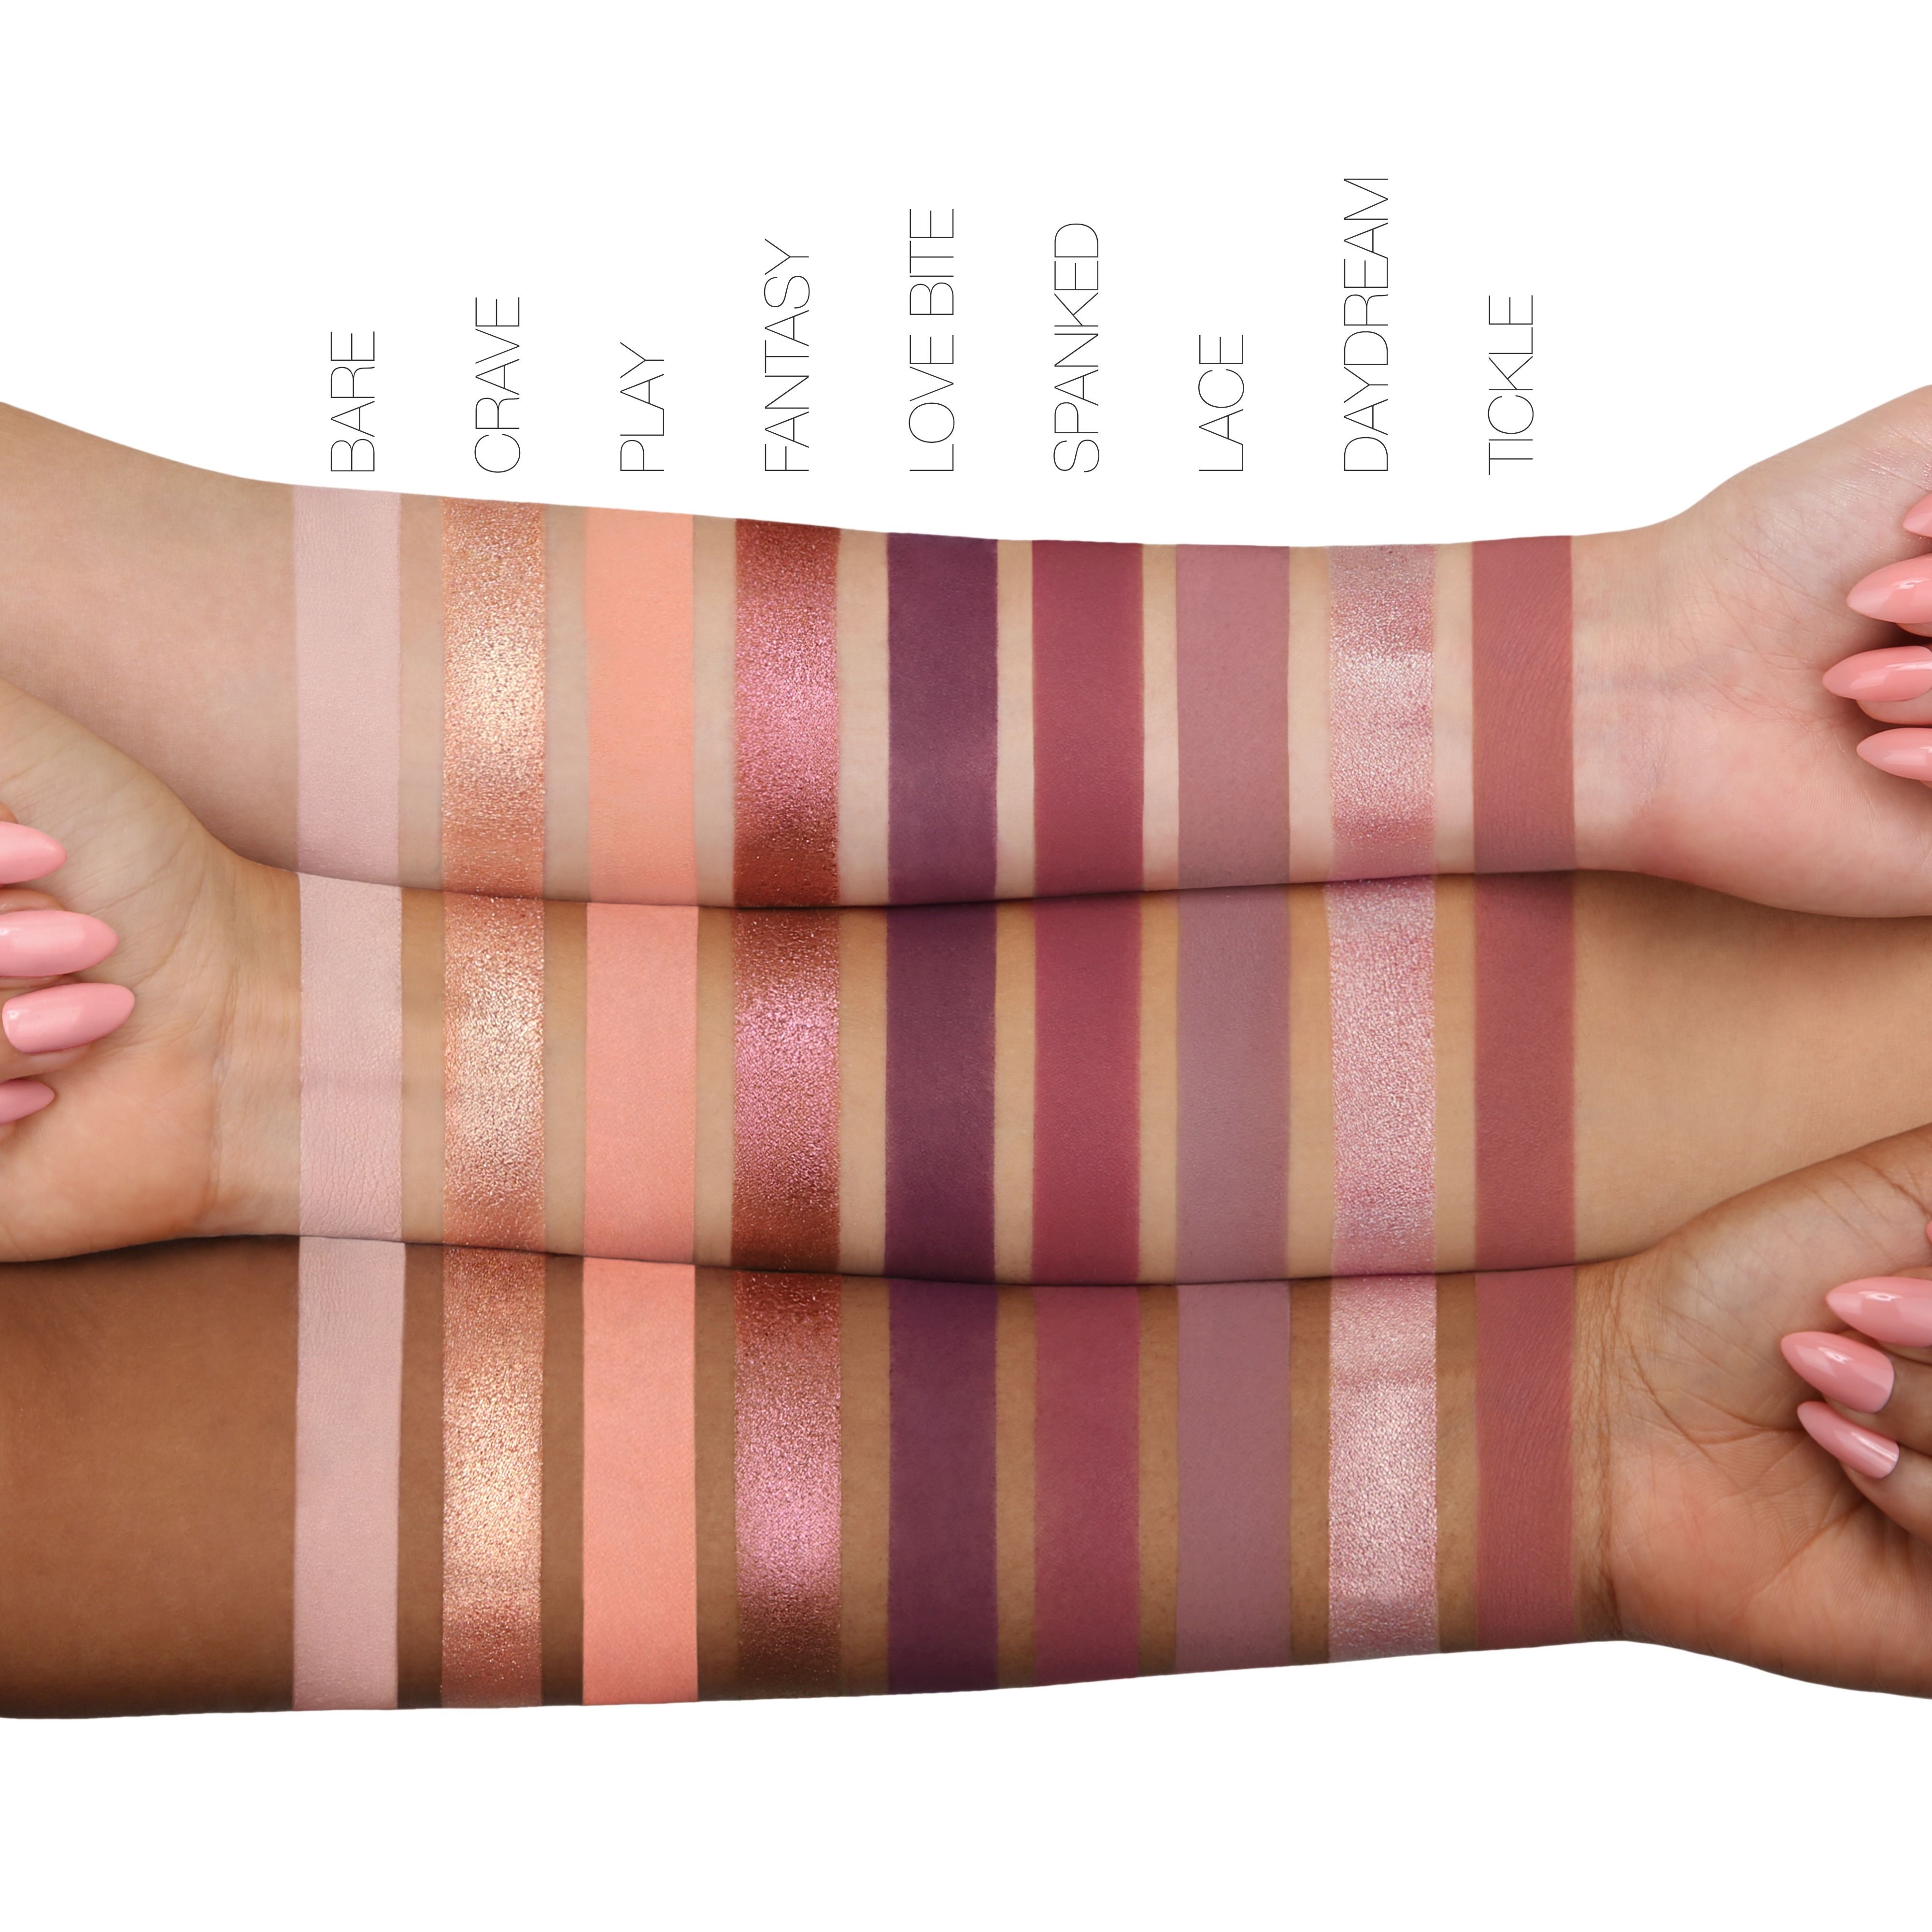 Nude Huda palette swatches